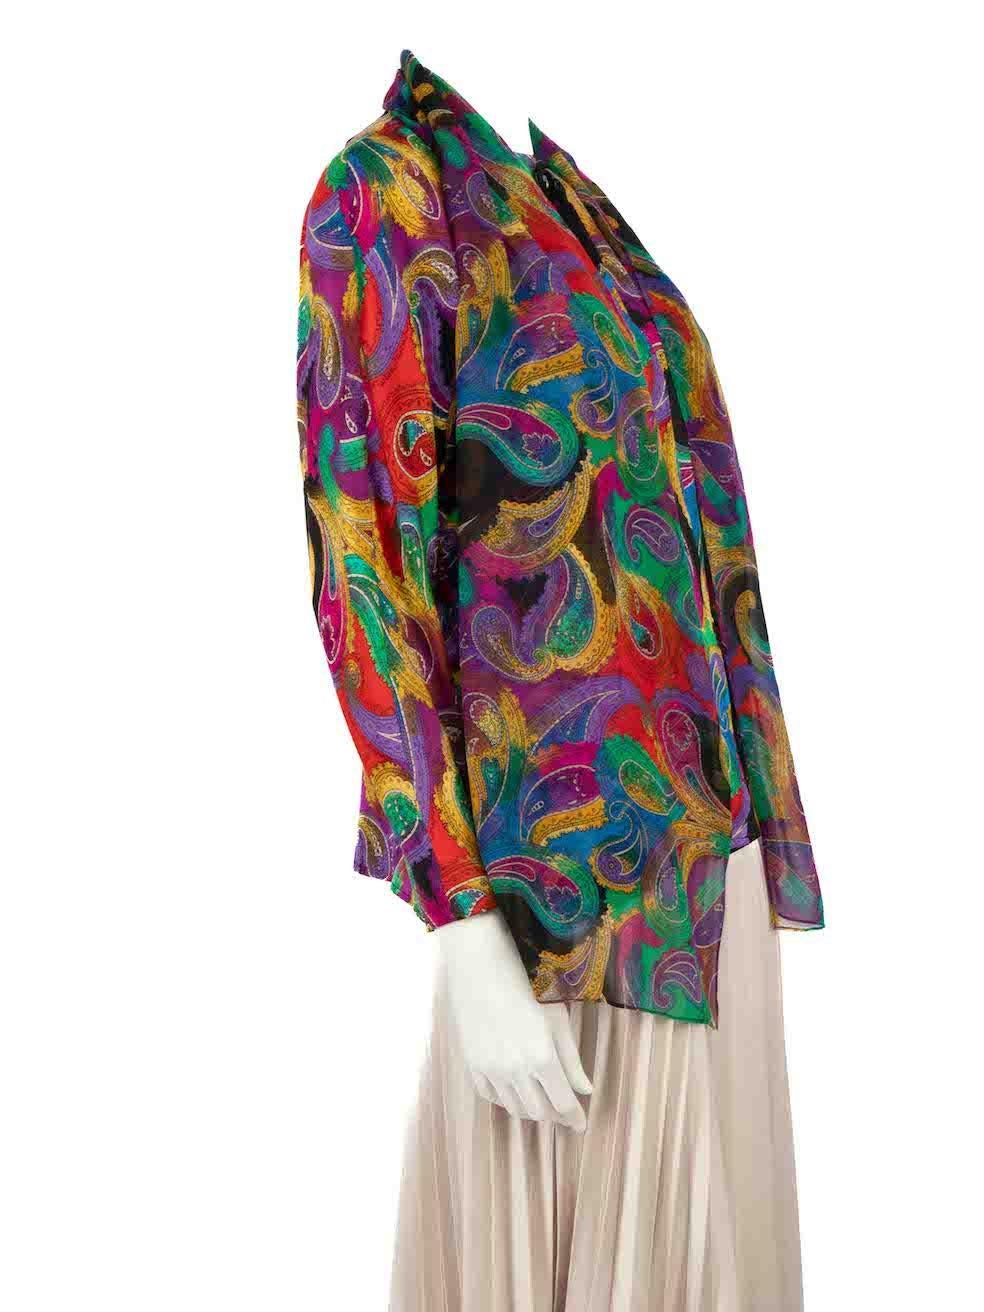 CONDITION is Very good. Minimal wear to blouse is evident. Minimal wear to the lining with light discolouration seen inside the collar on this used Akris designer resale item.
 
 
 
 Details
 
 
 Multicolour
 
 Silk
 
 Blouse and matching scarf
 
